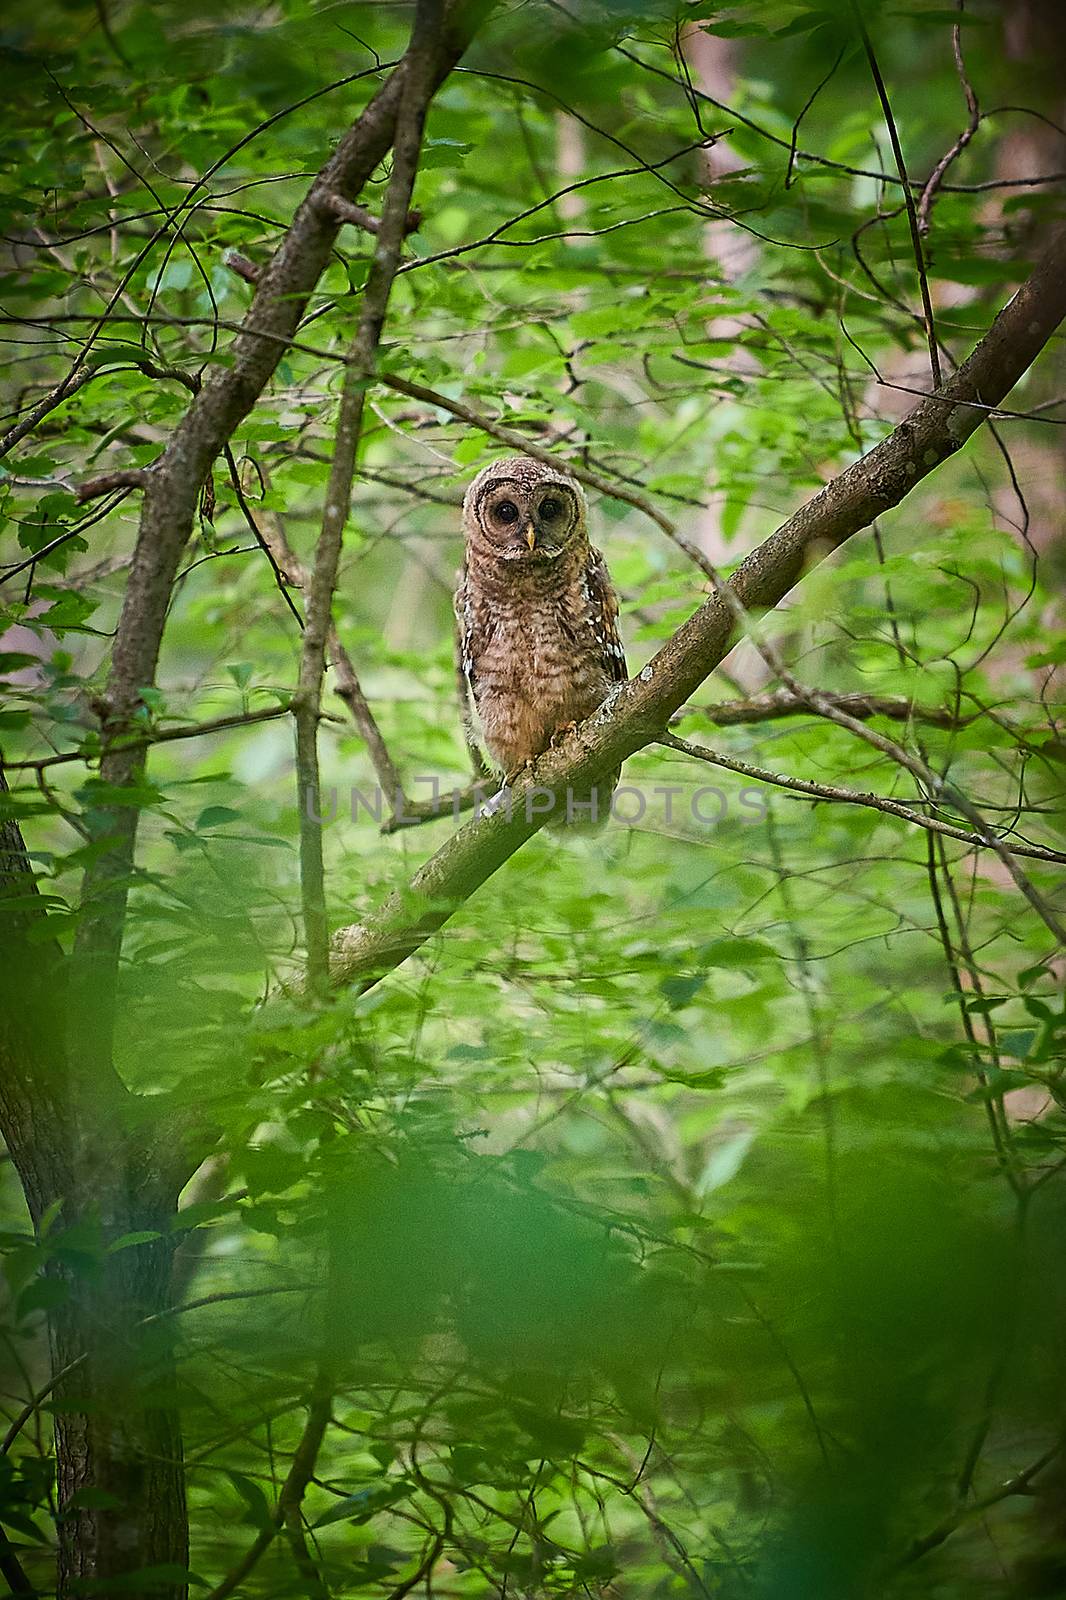 Adult Barred Owl sitting in a tree. by patrickstock